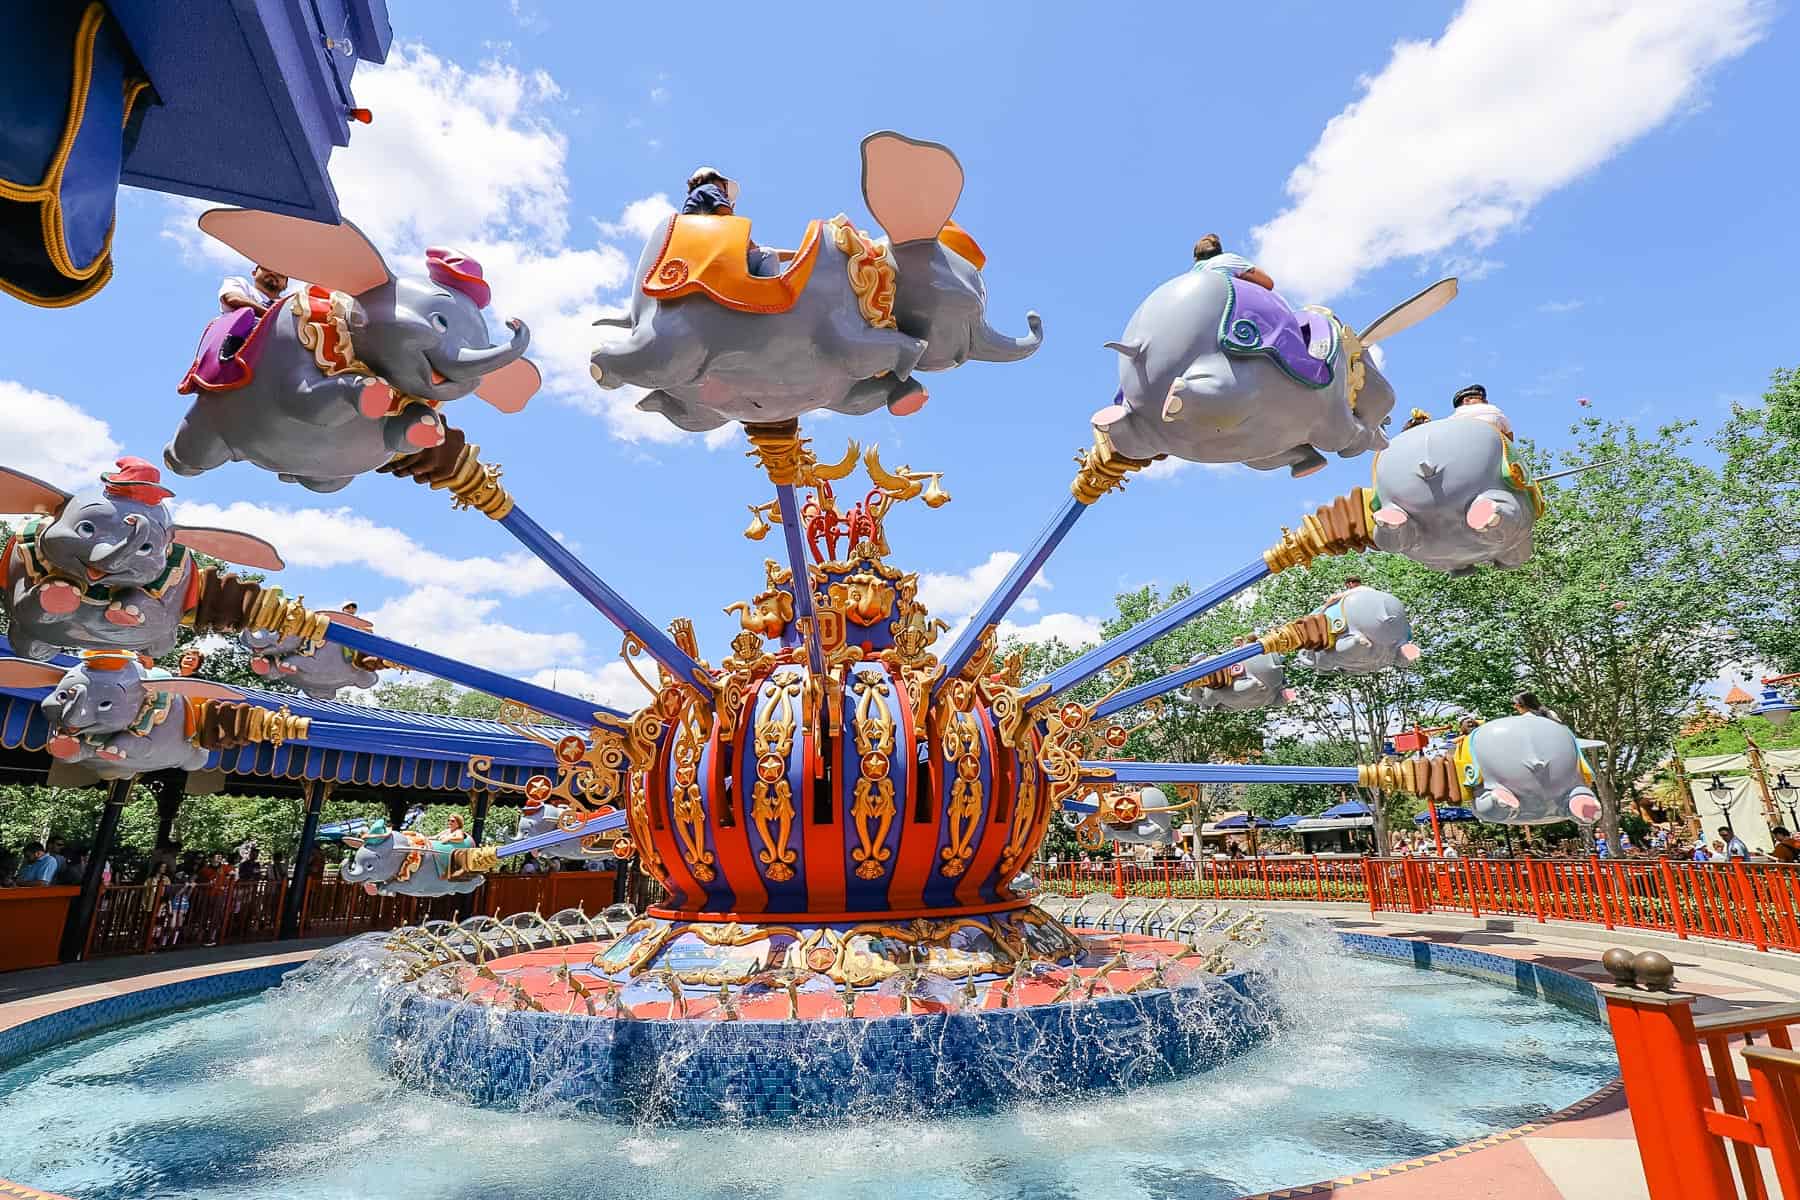 Guests riding Dumbo, the Flying Elephant. 